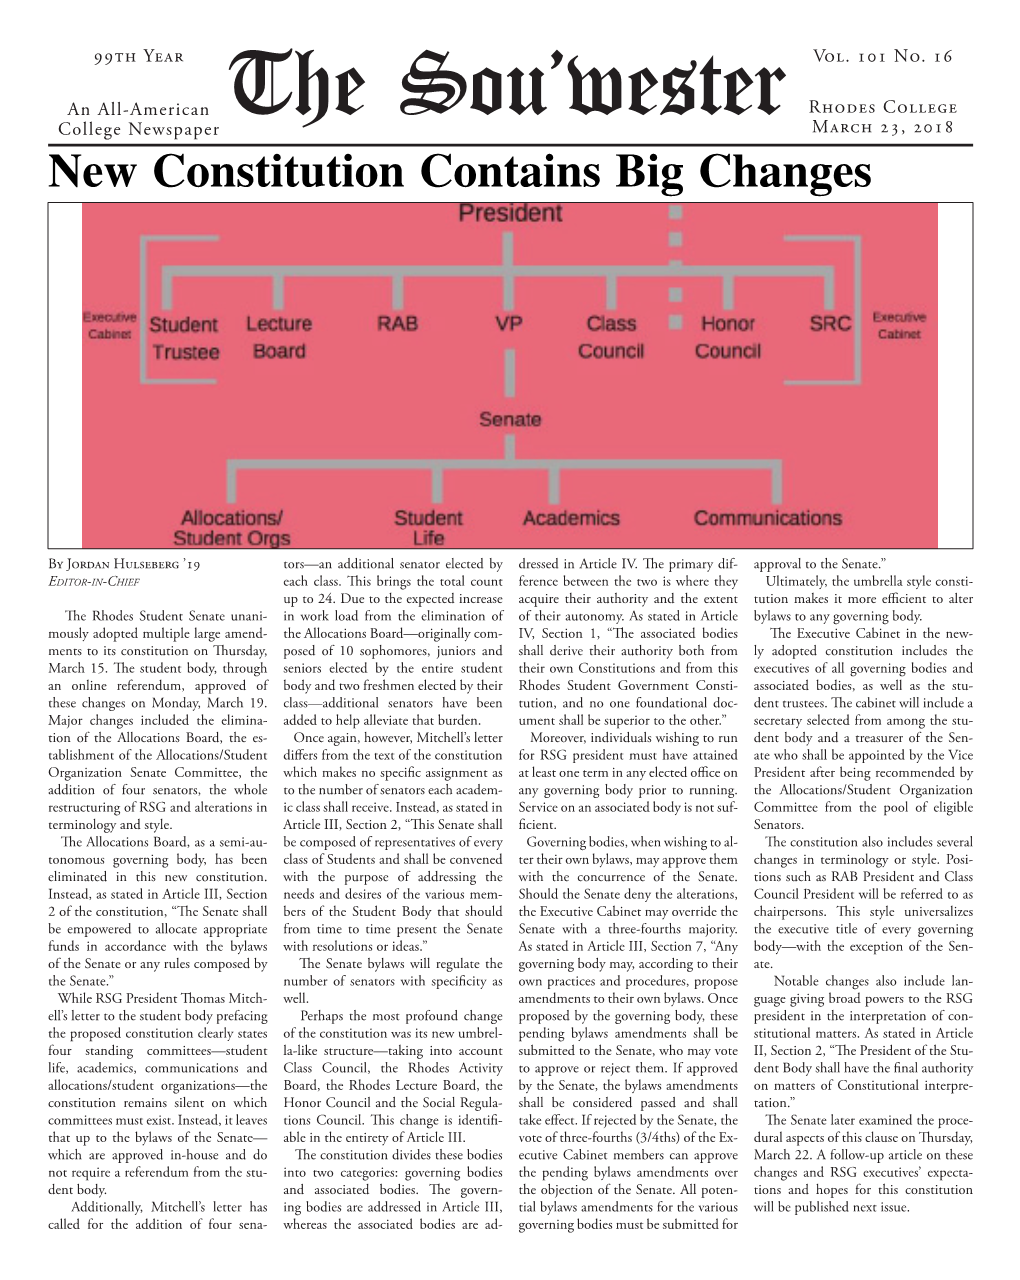 New Constitution Contains Big Changes